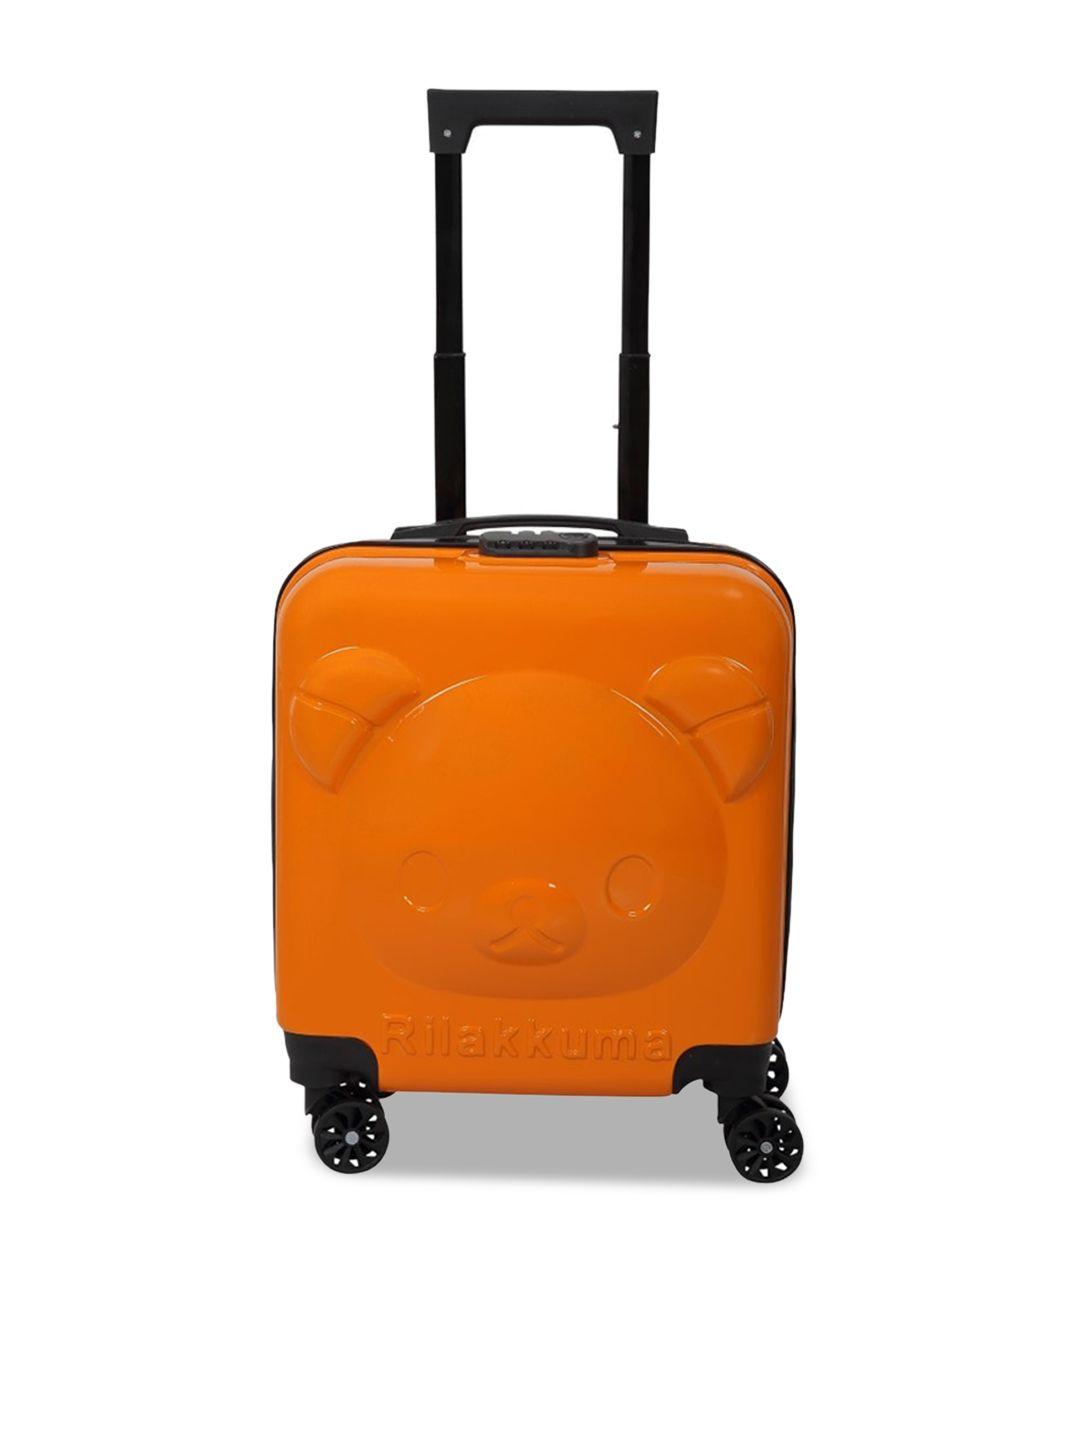 polo class kids hard-sided cabin trolley suitcase